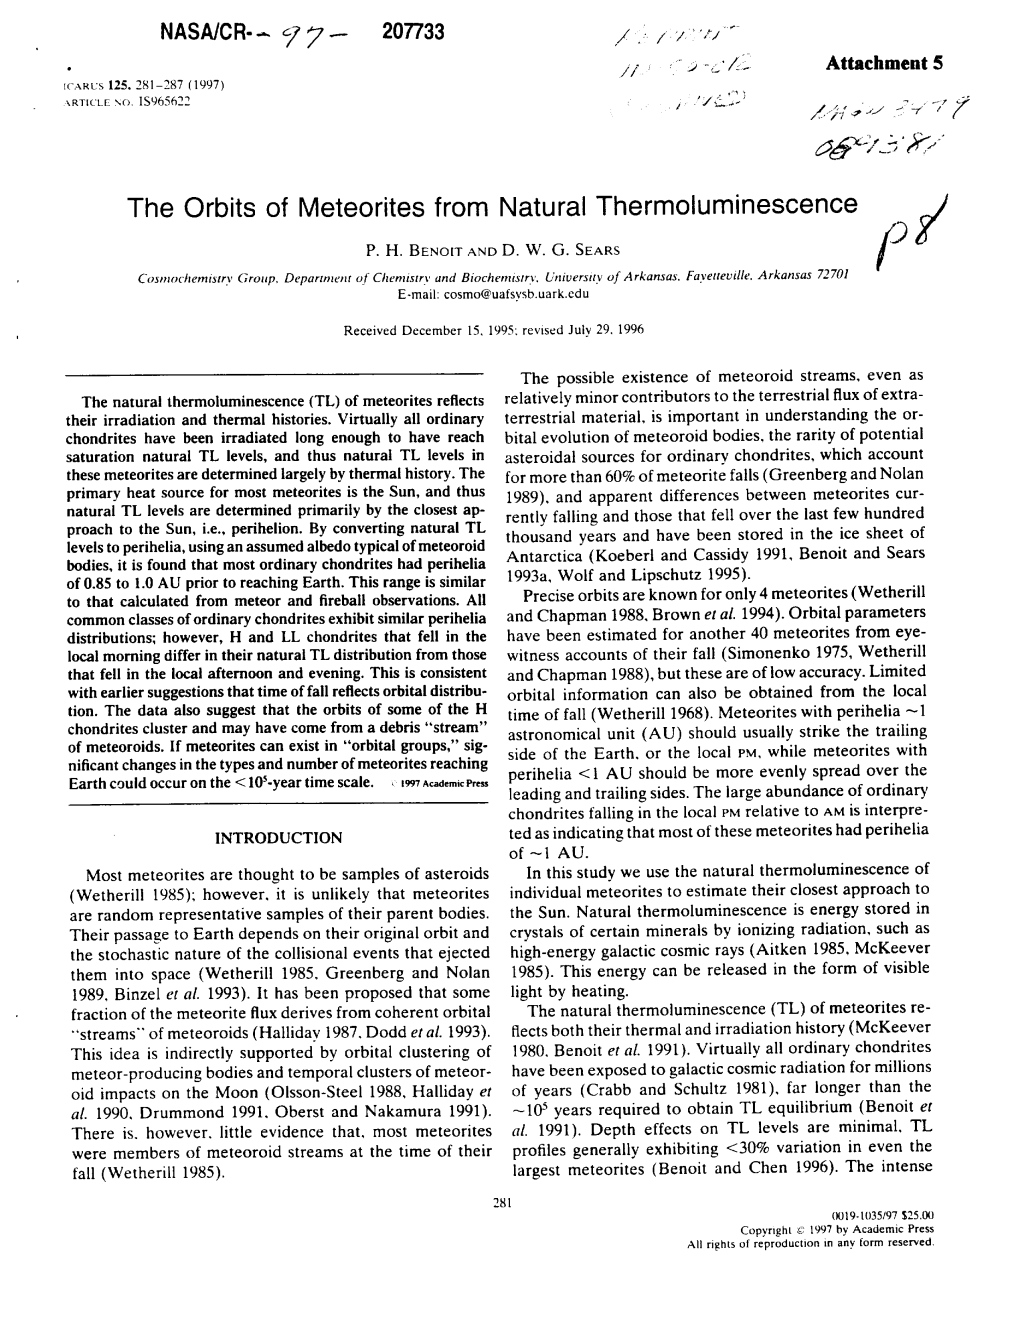 The Orbits of Meteorites from Natural Thermoluminescence